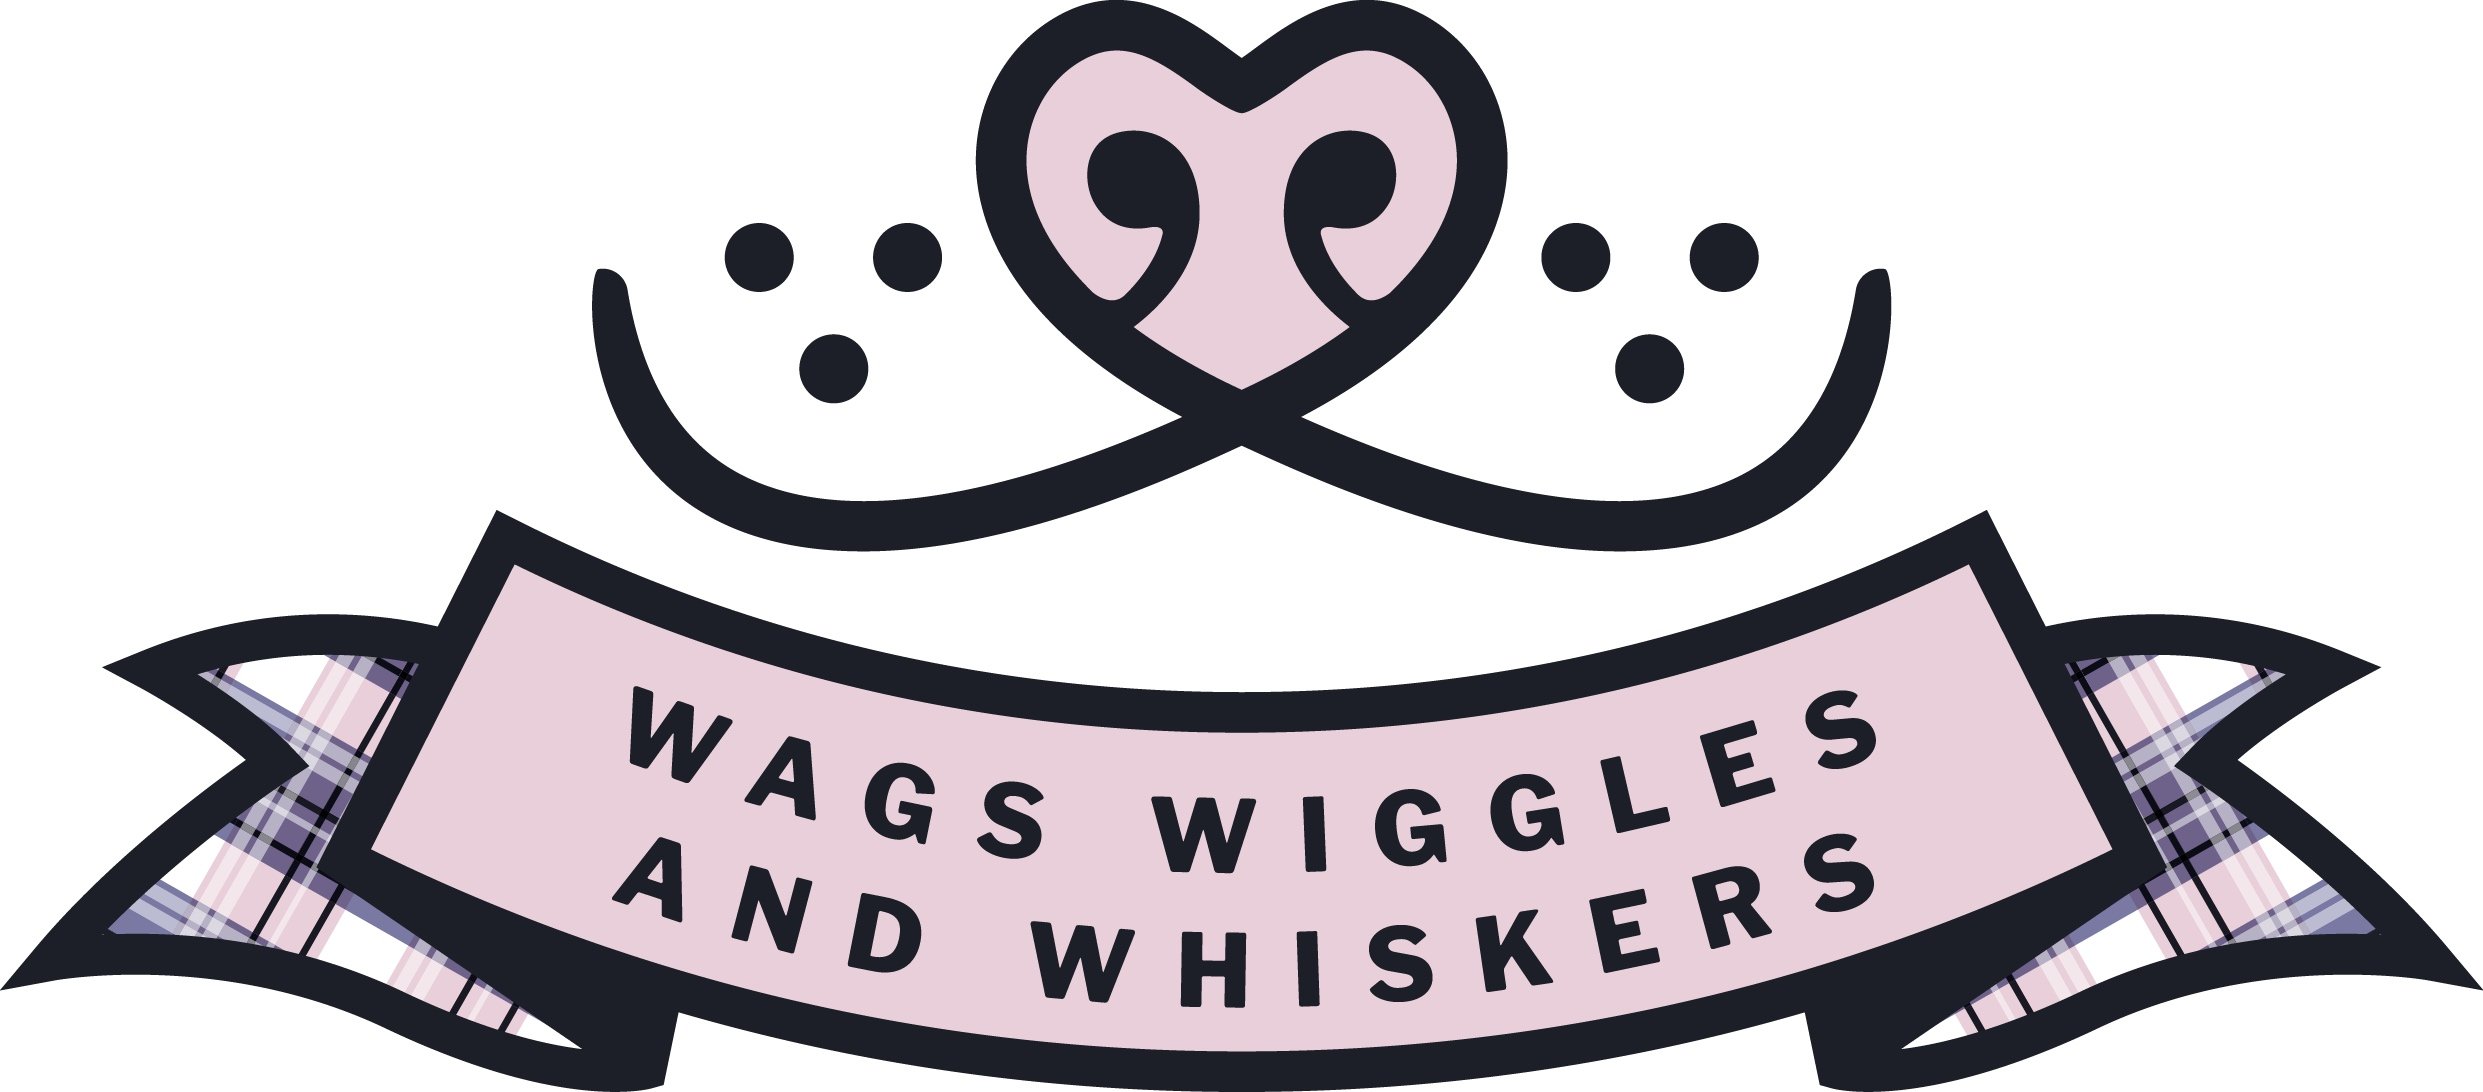 wags wiggles and whiskers 